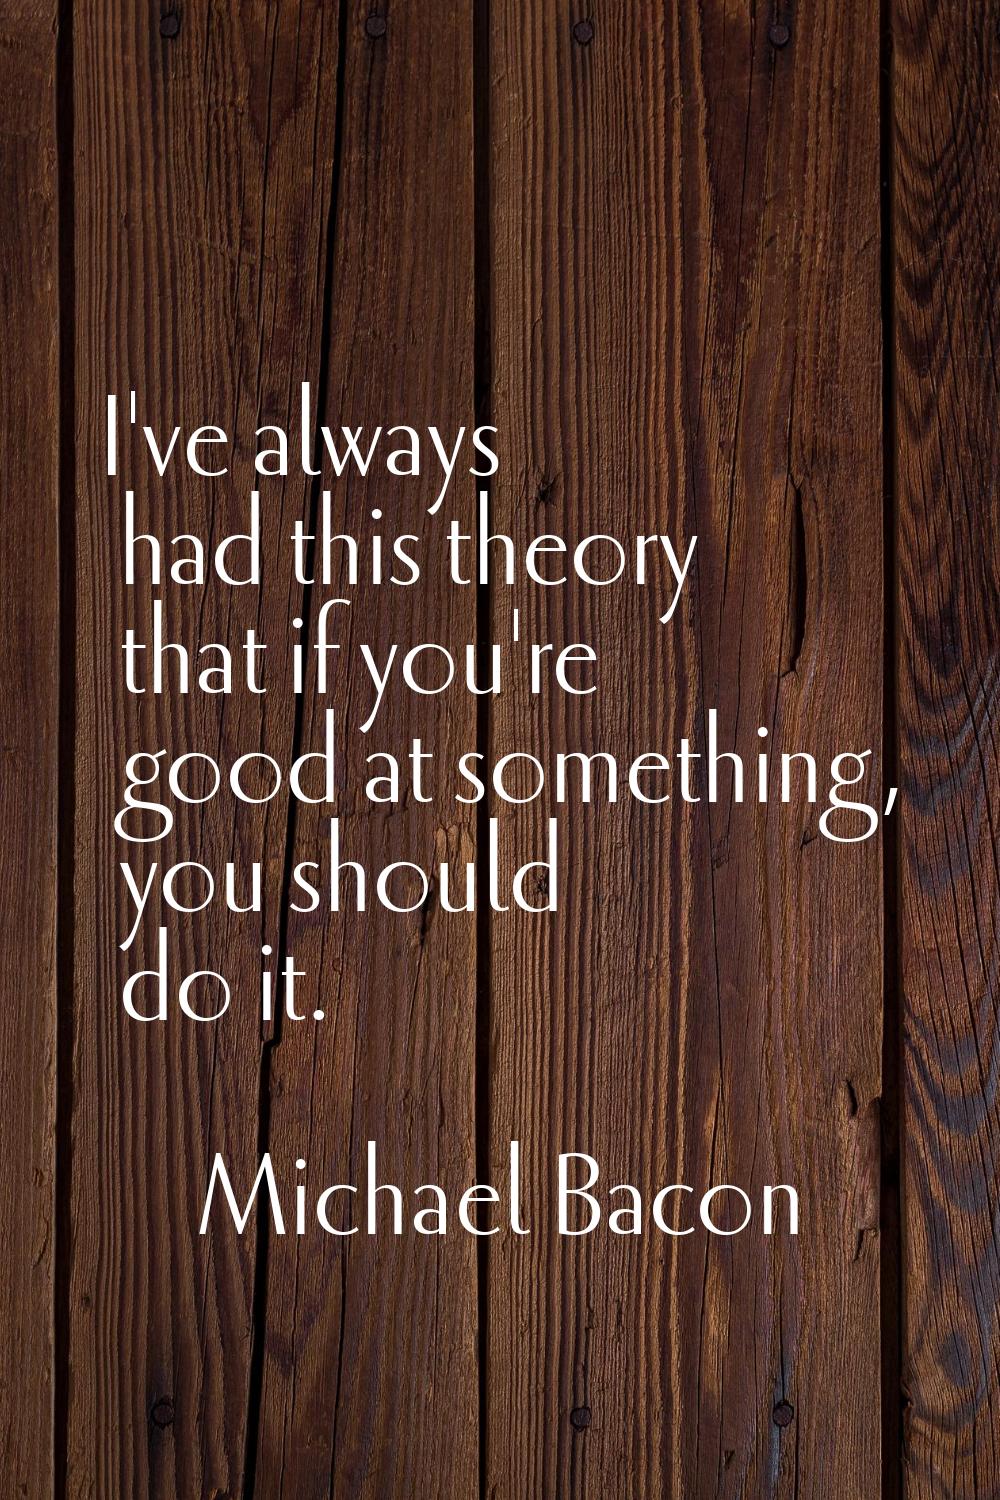 I've always had this theory that if you're good at something, you should do it.